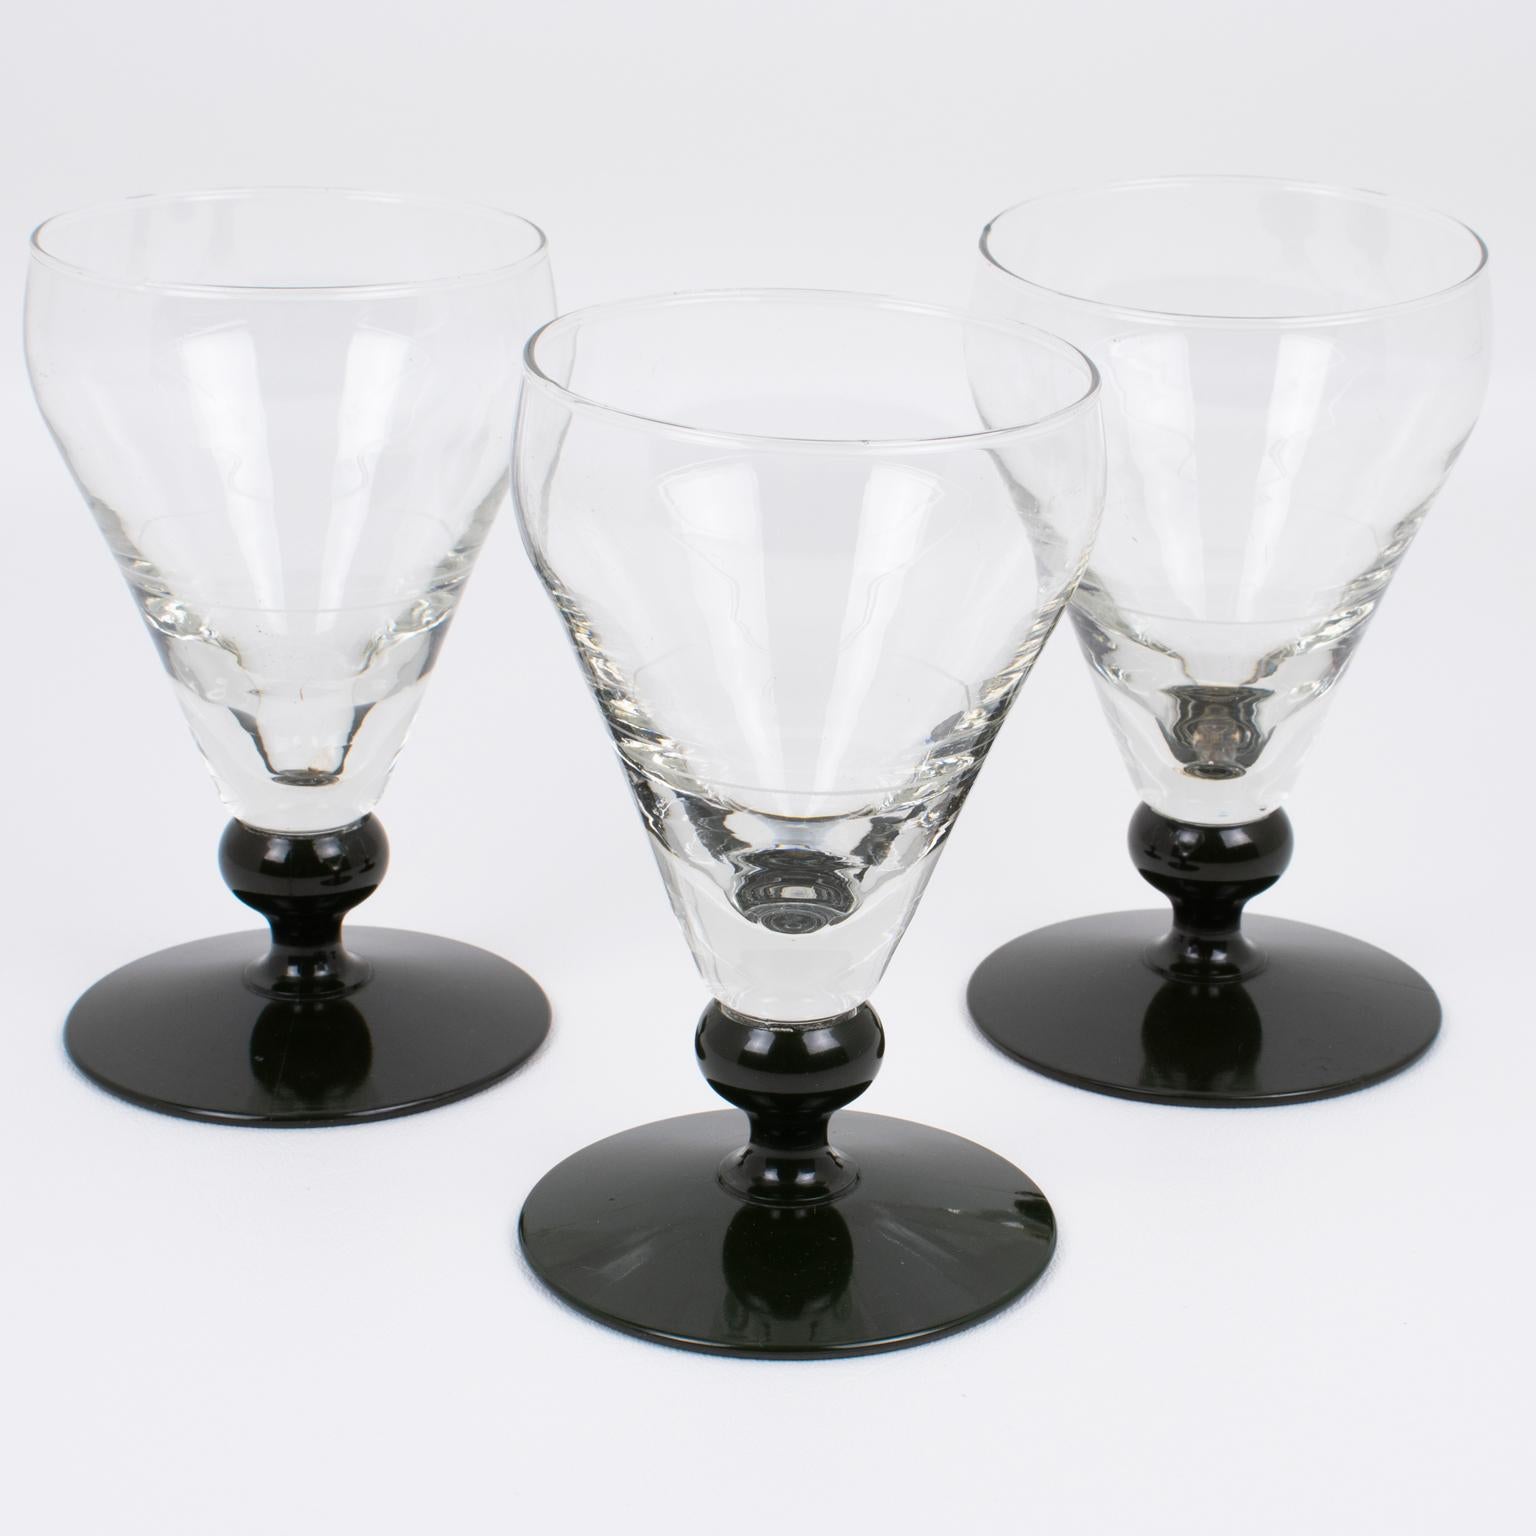 French Hand-Blown Glass and Bakelite Absinthe Glasses Set, 3 pieces, 1910s In Good Condition For Sale In Atlanta, GA